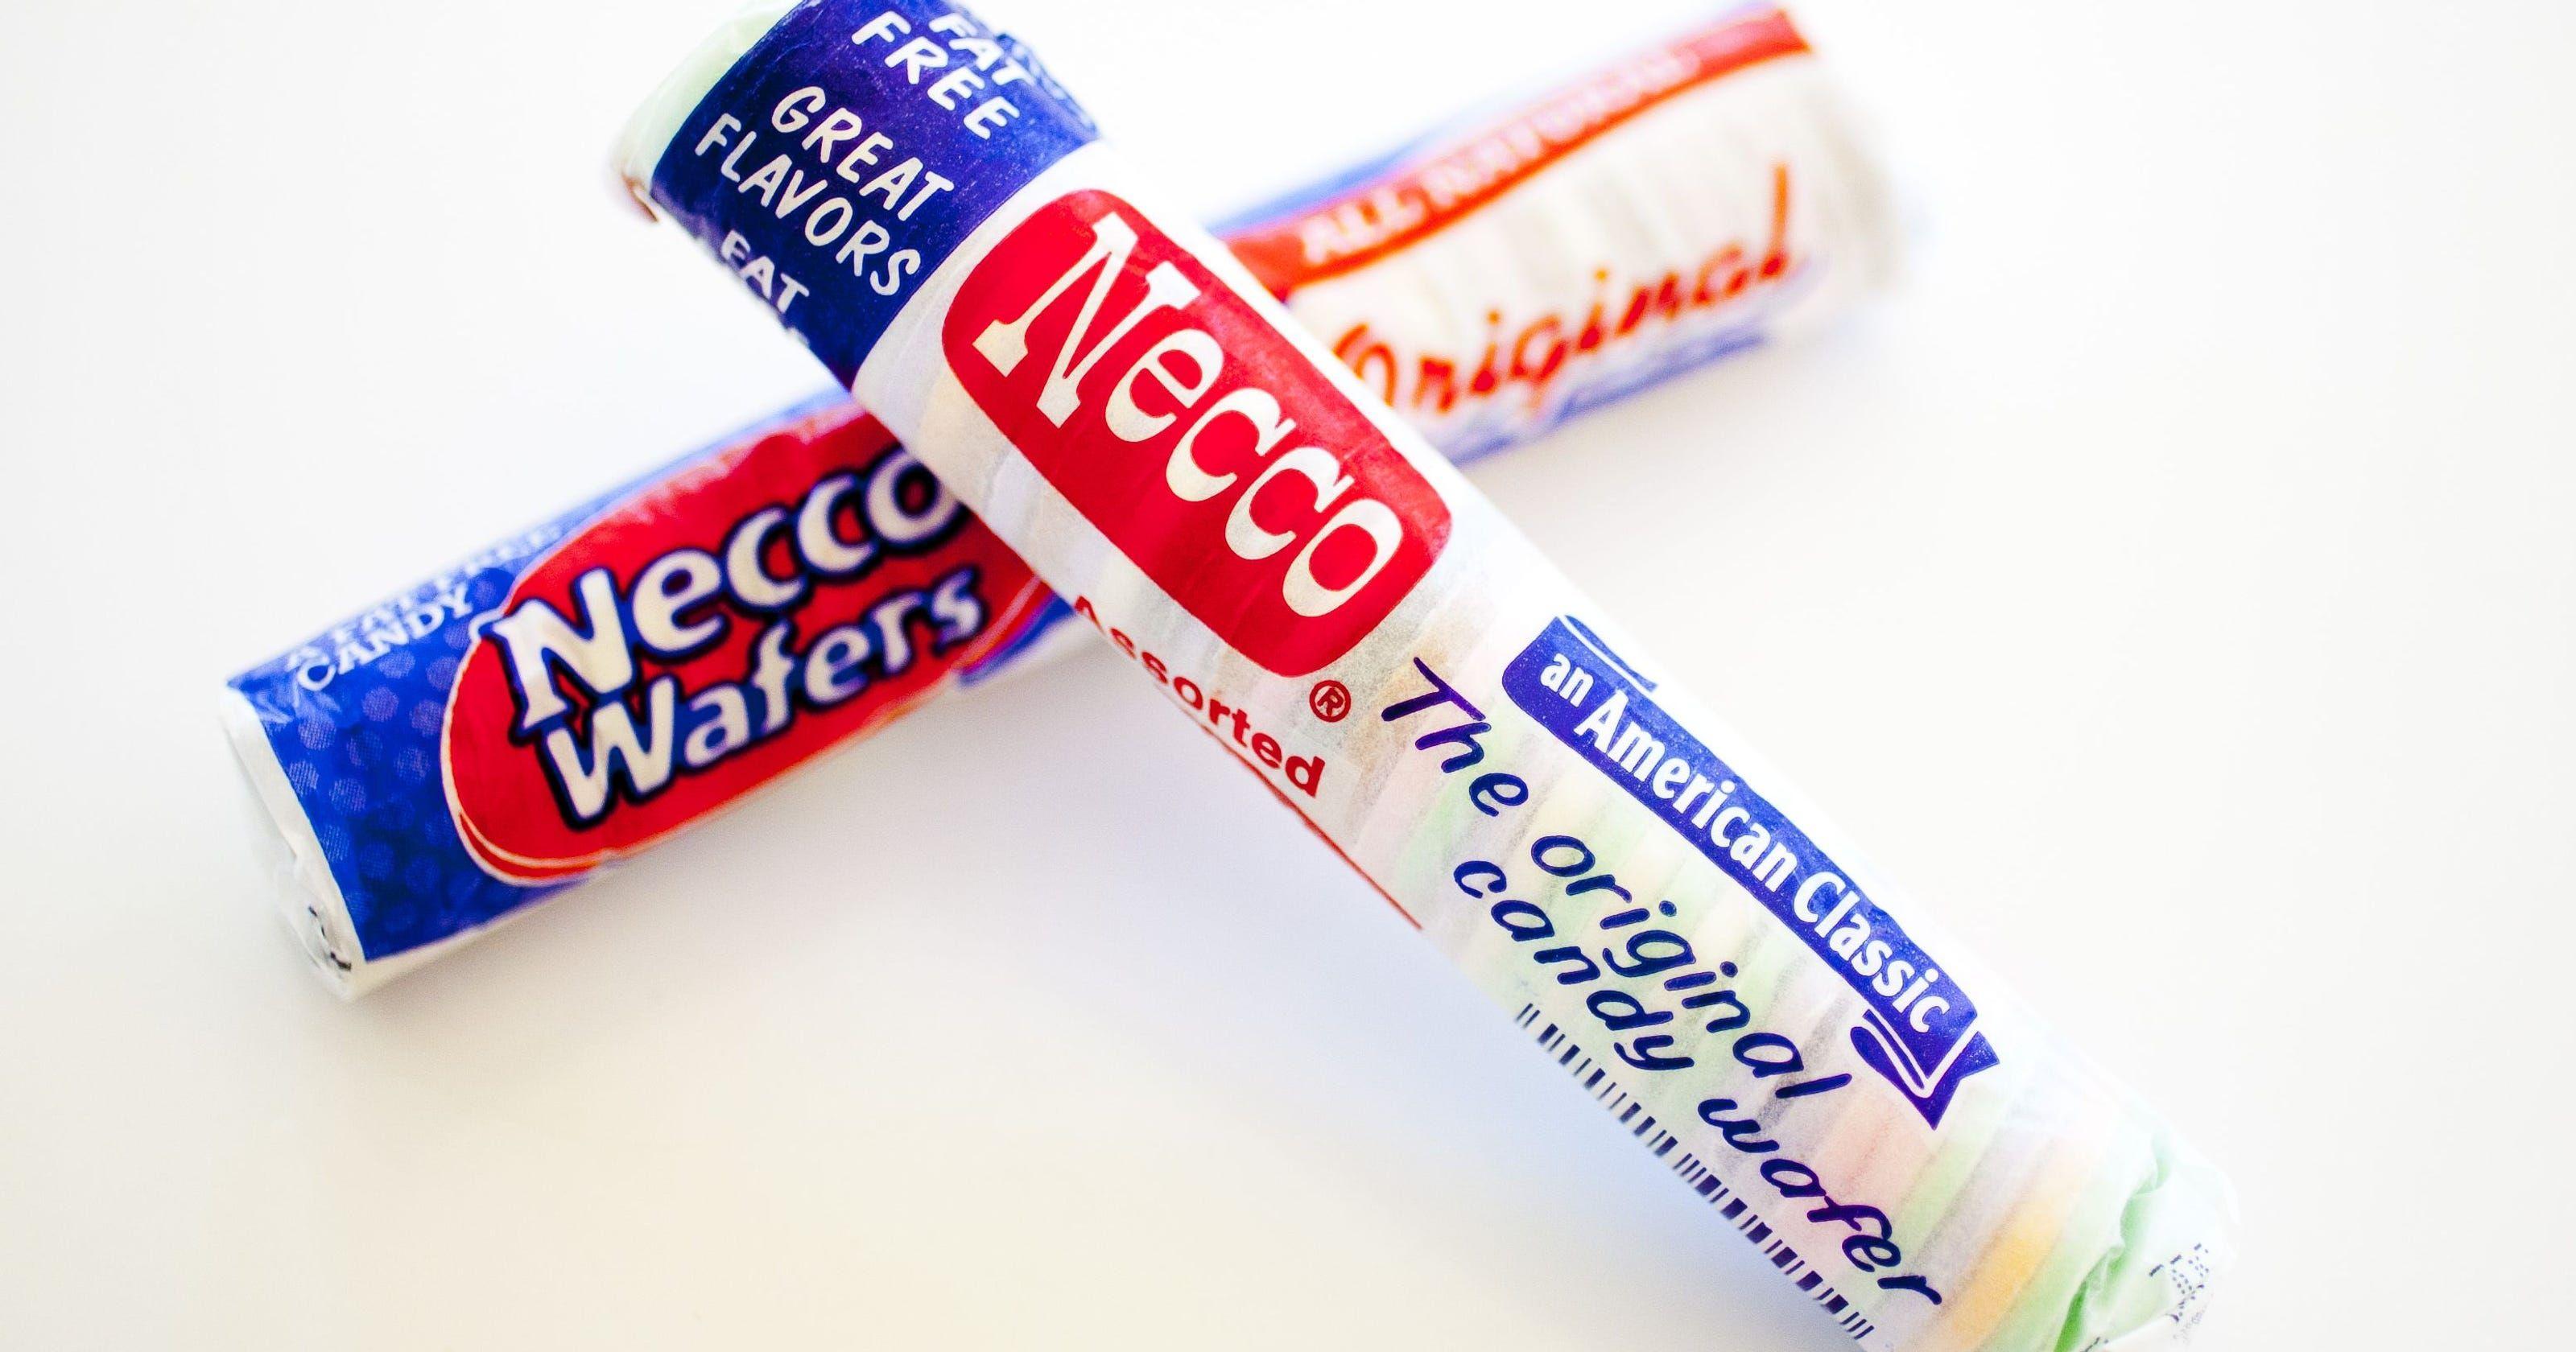 Necco Logo - Sugar shocker: Necco's iconic candy could disappear forever